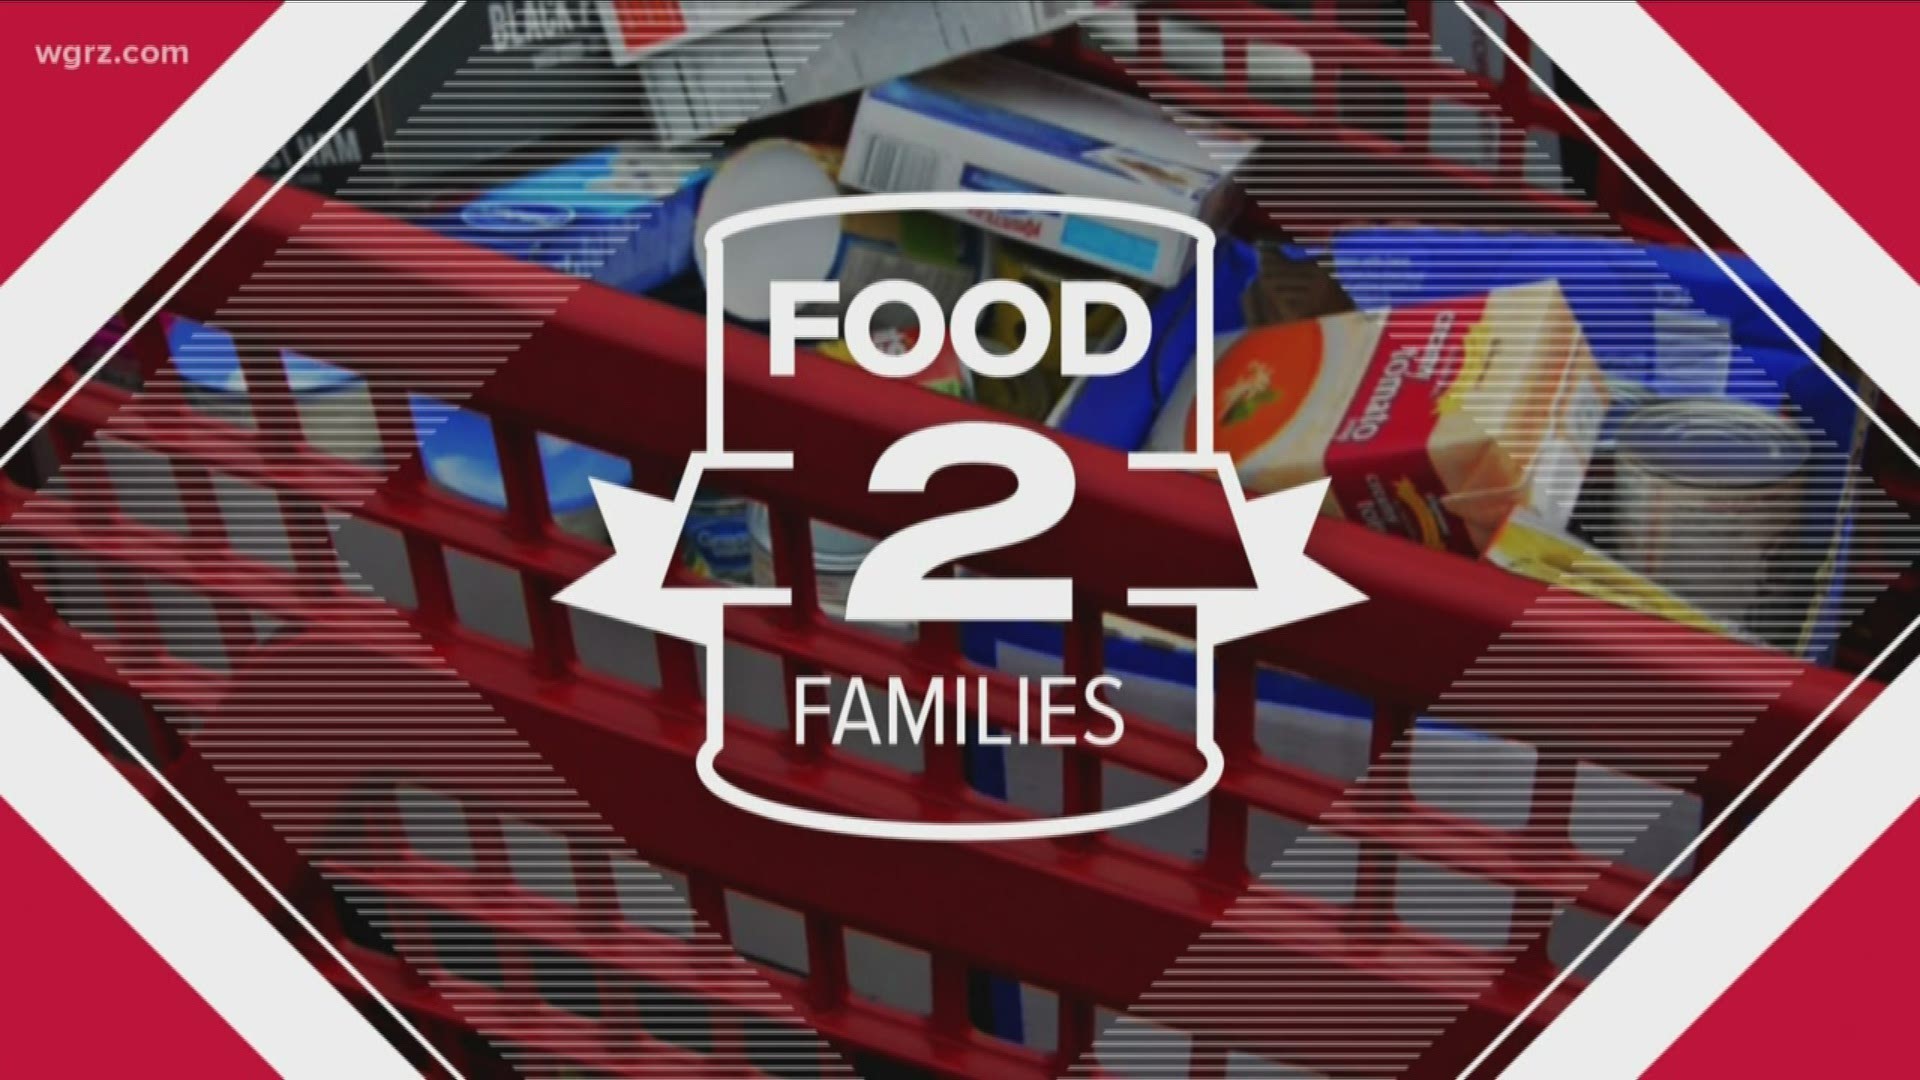 Over the last 14 years Food 2 Families has provided more than 10 million meals through FeedMore WNY, the consolidation of the Food Bank of WNY and Meals on Wheels.